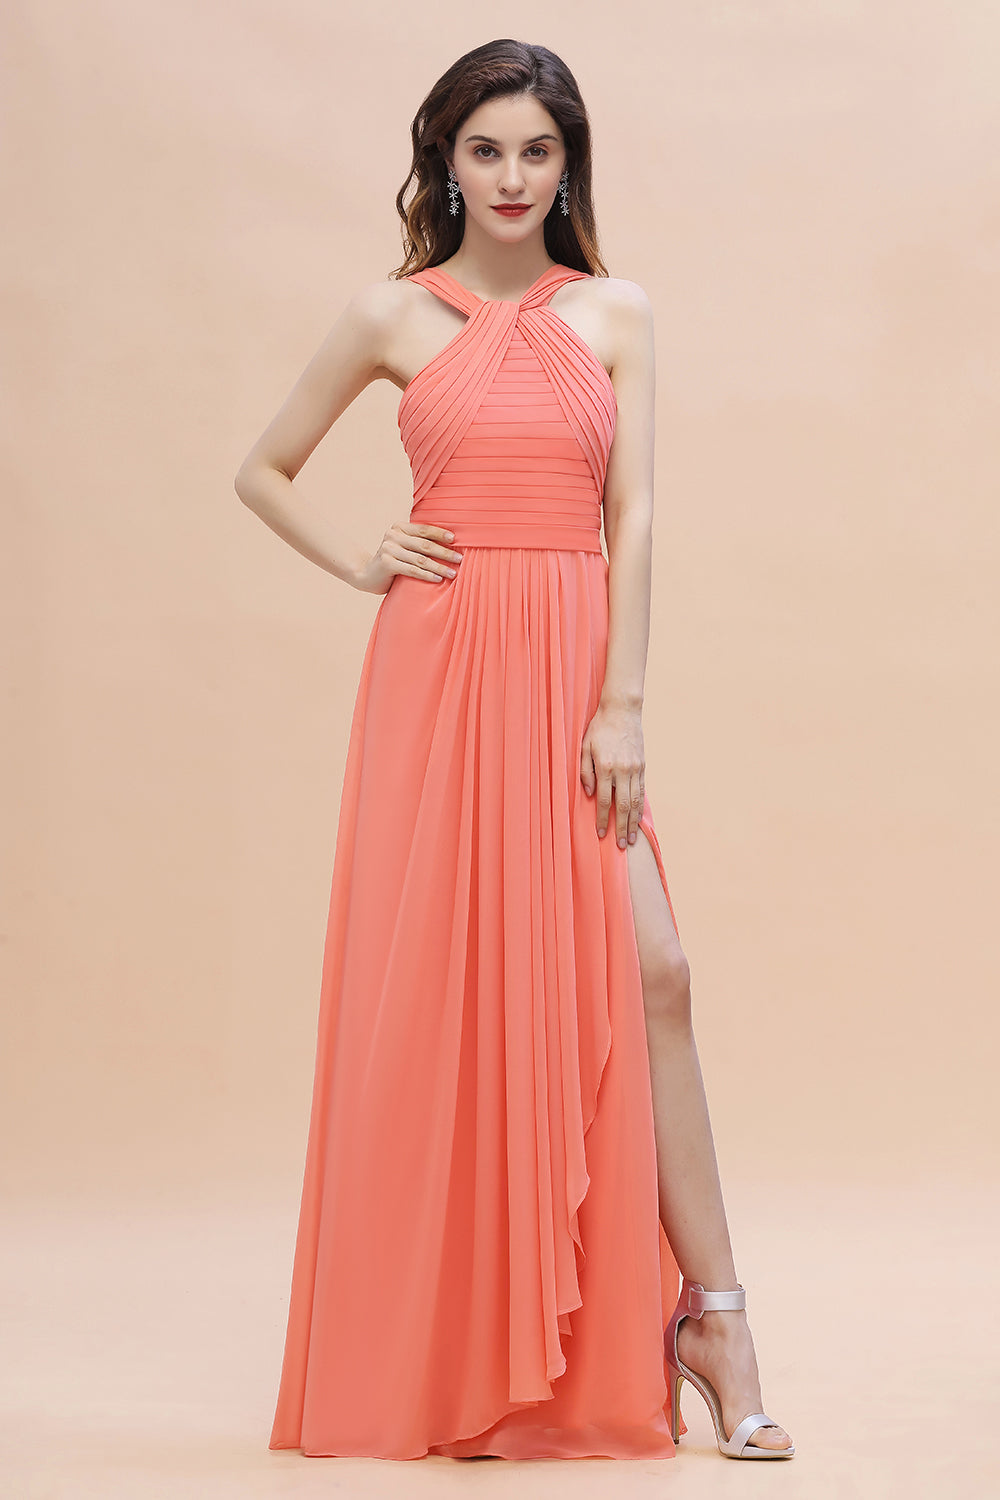 Gorgeous A-Line Sleeveless Coral Chiffon Bridesmaid Dress with Ruffles On Sale